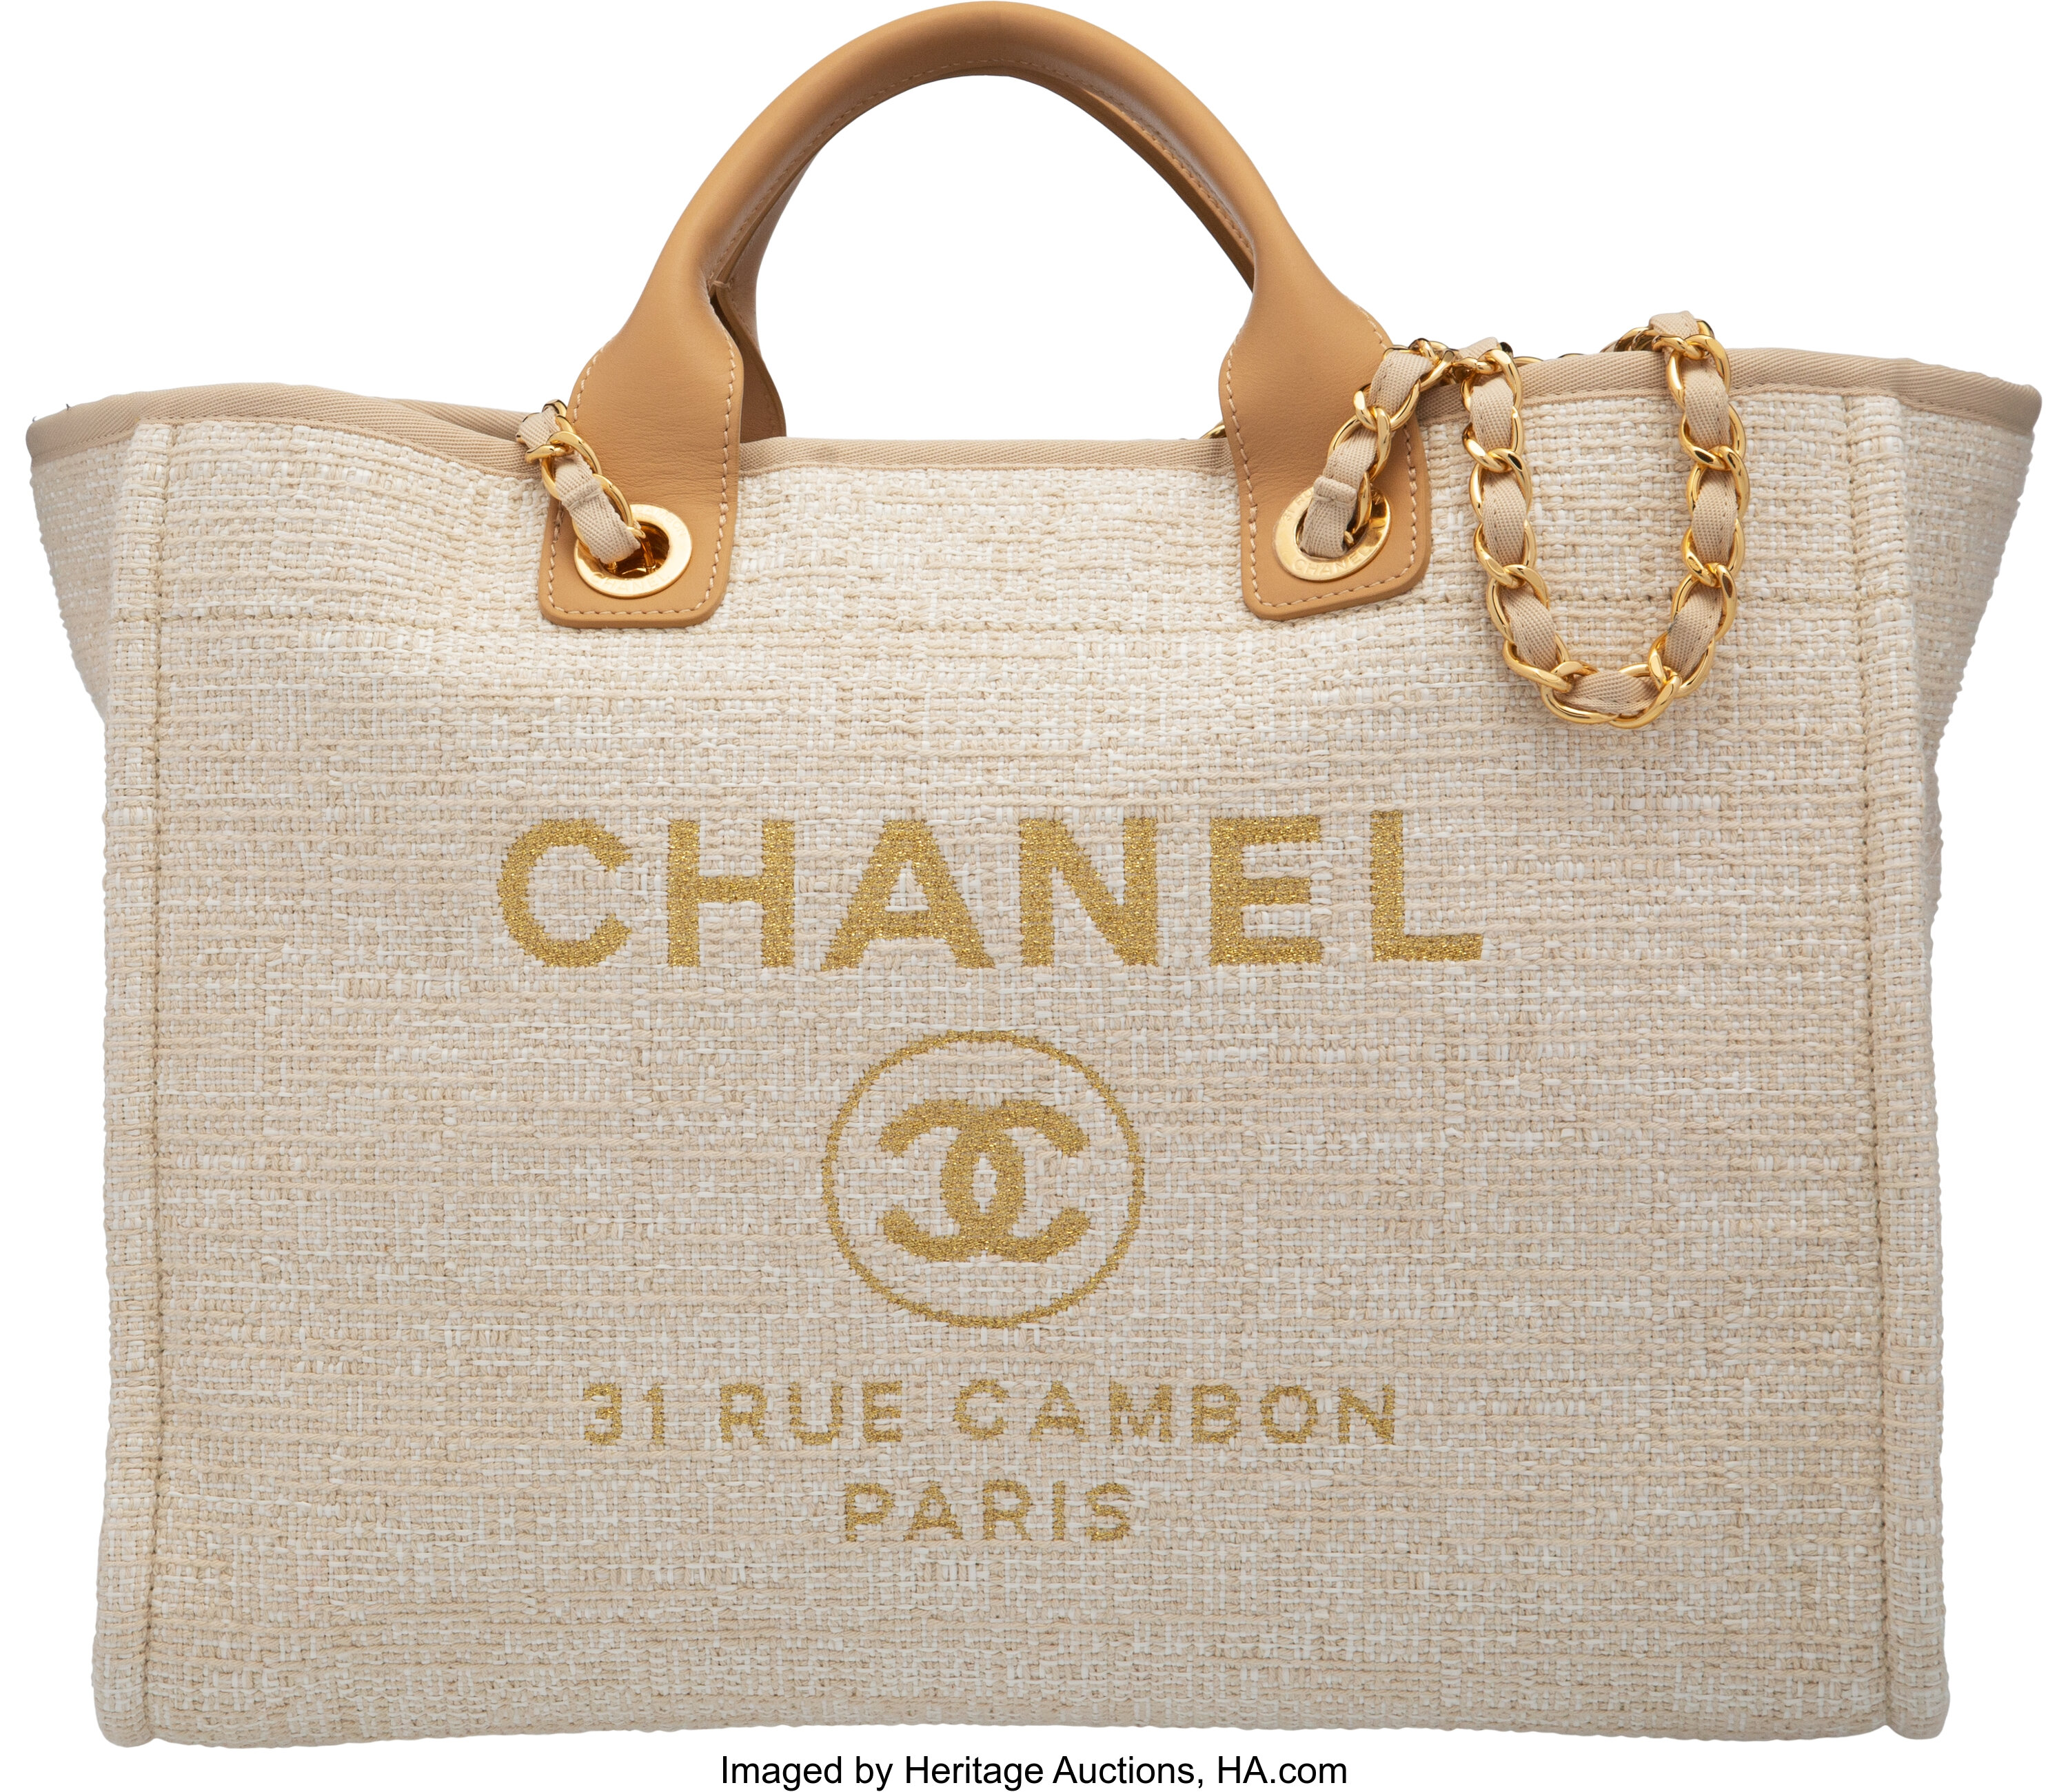 Chanel 2021 Ivory/ Gold Large Deauville Shopping Tote Bag